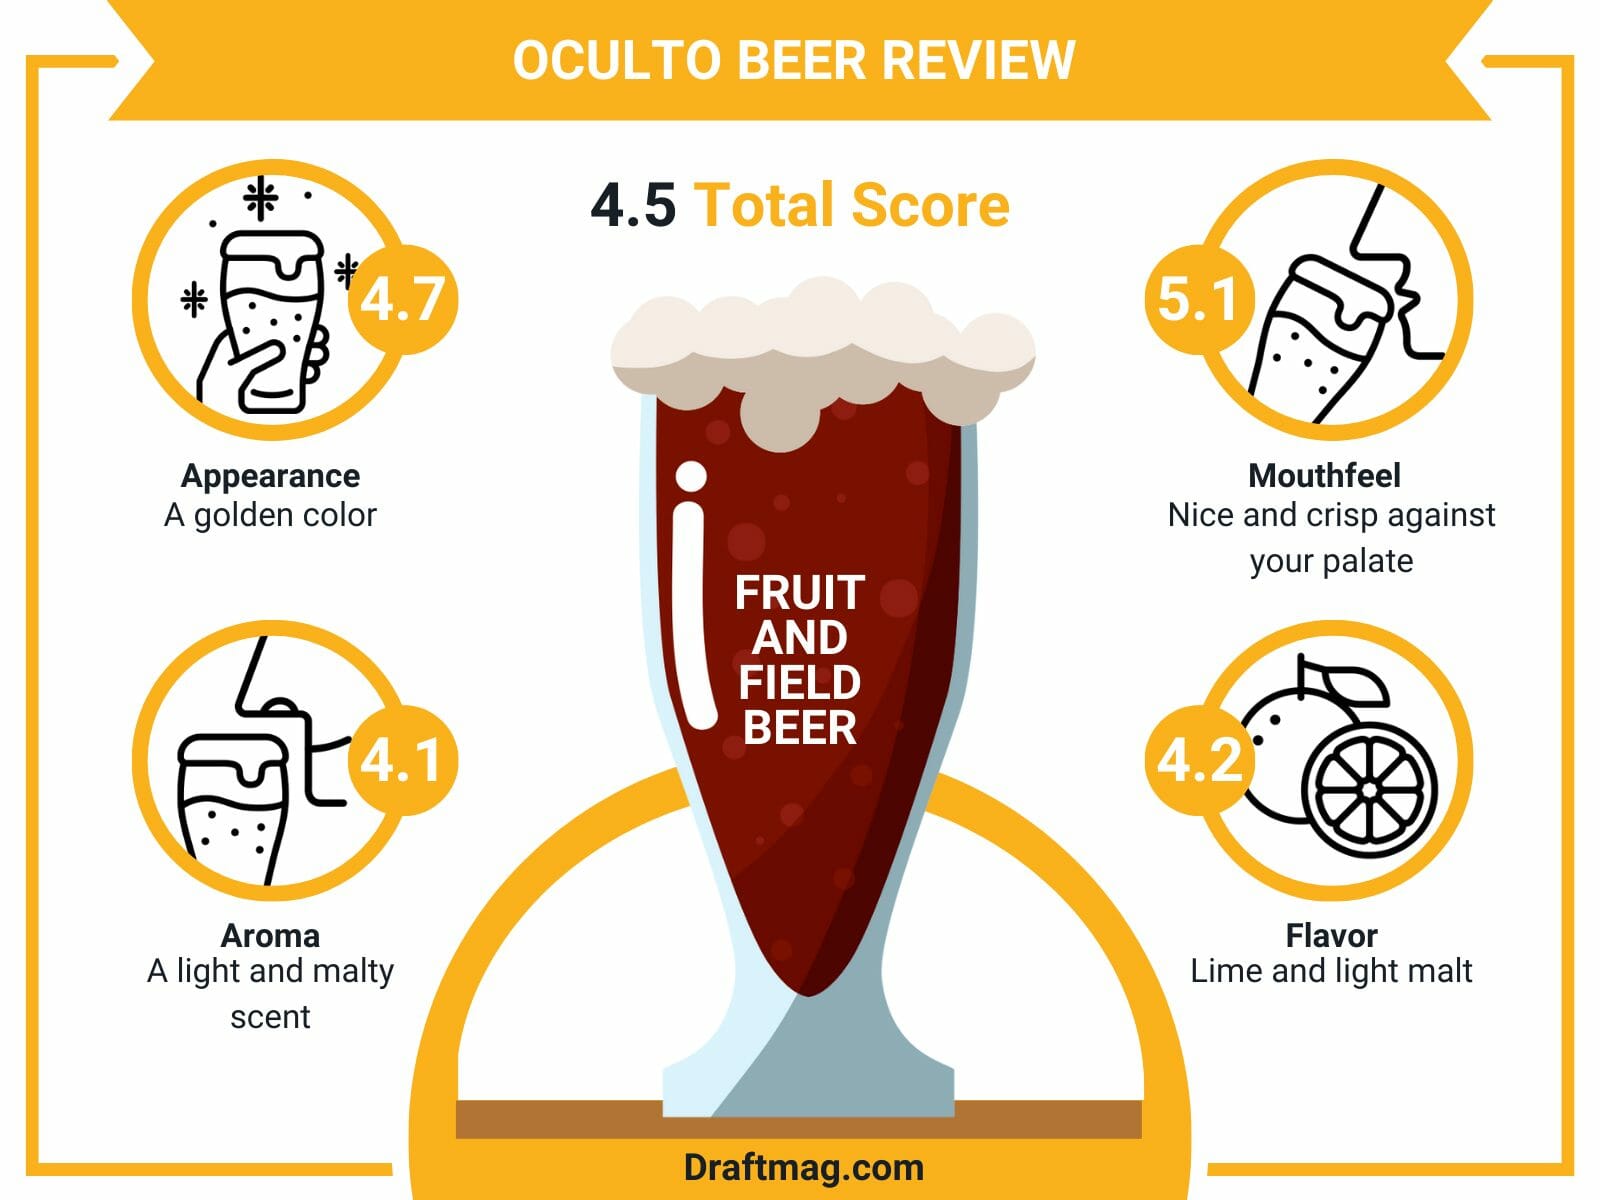 Oculto beer review infographic